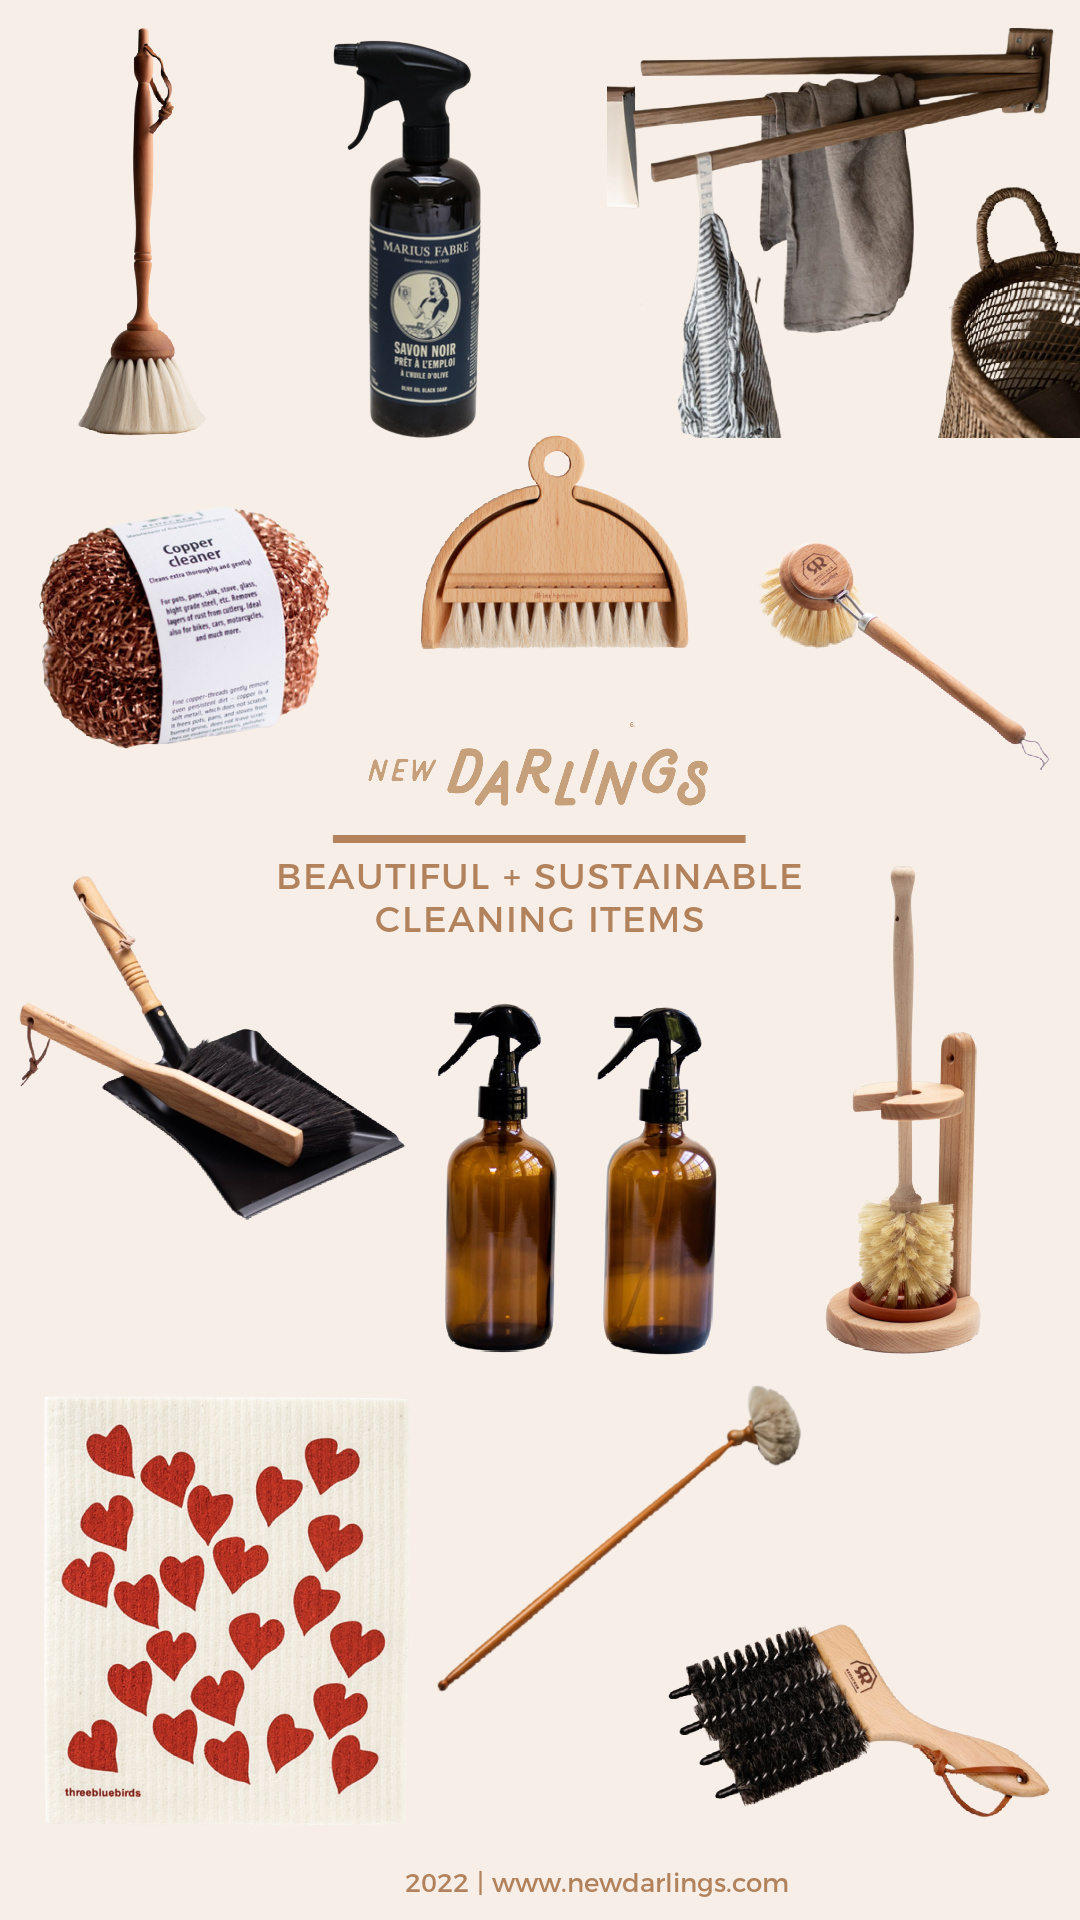 ethically made and sustainable cleaning products